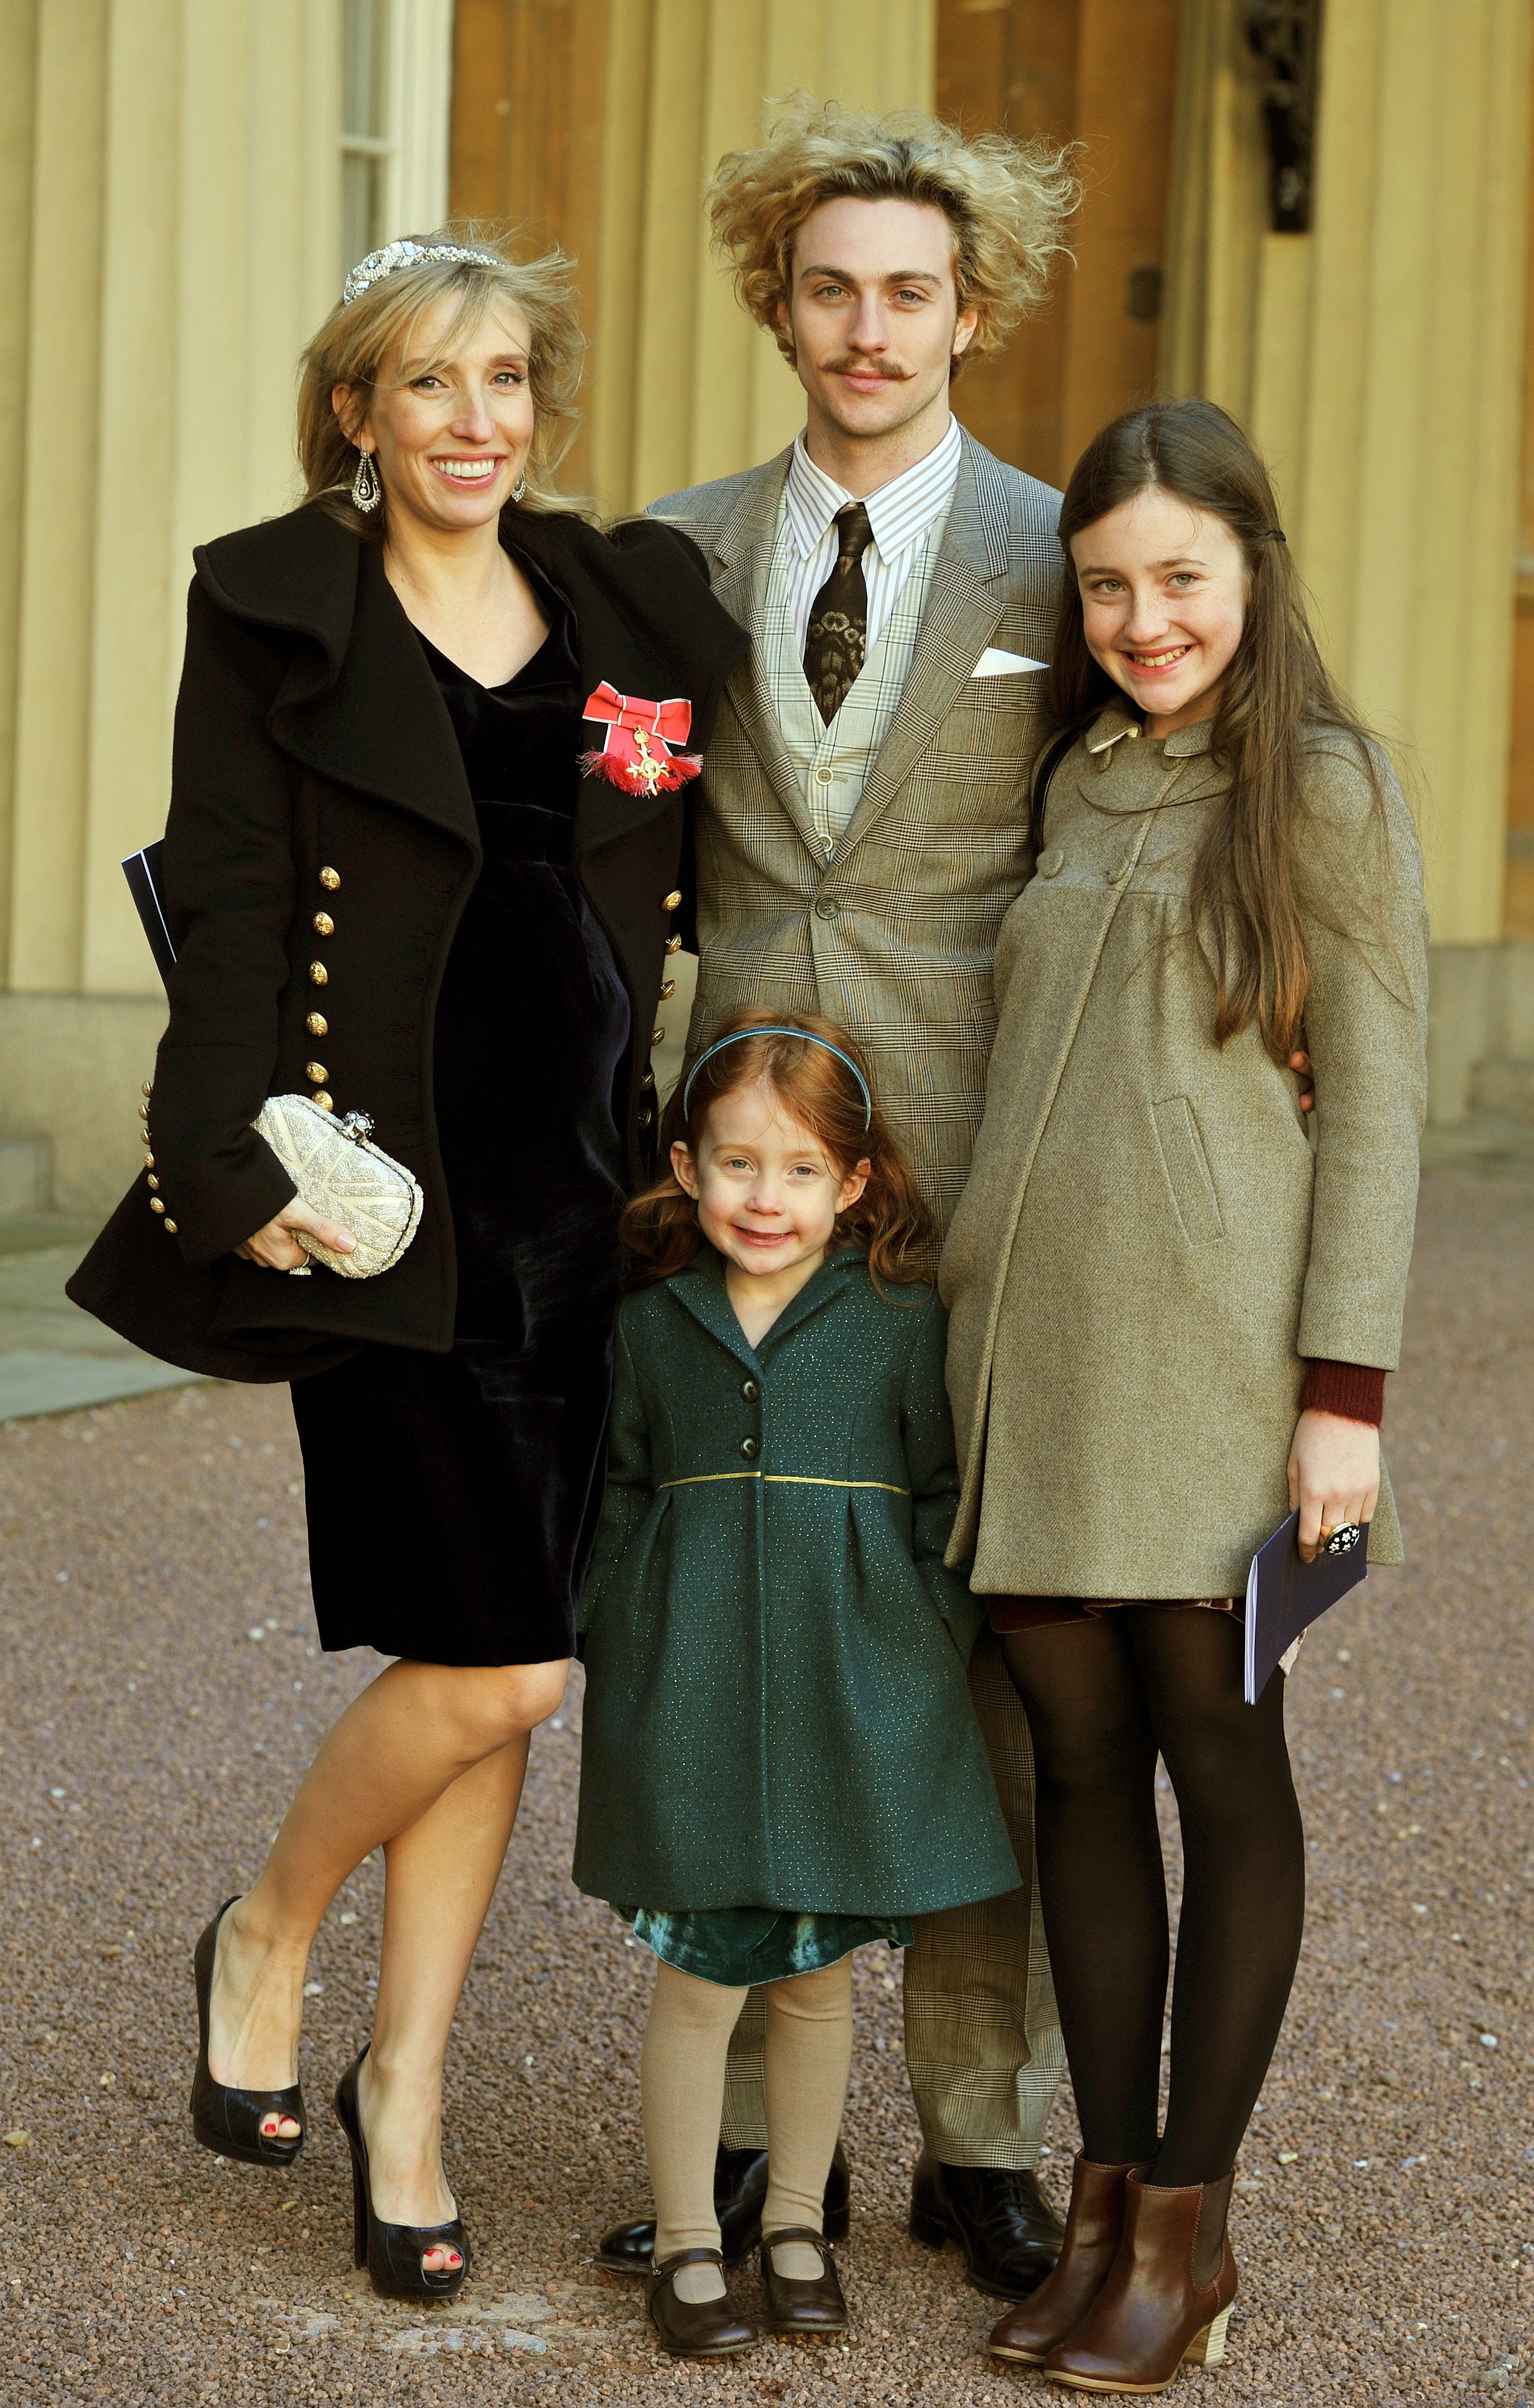 Sam Taylor-Wood and Aaron Johnson and her children Angelica (R) and Jessie during an Investiture Ceremony at Buckingham Palace on December 14, 2011, in London. | Source: Getty Images